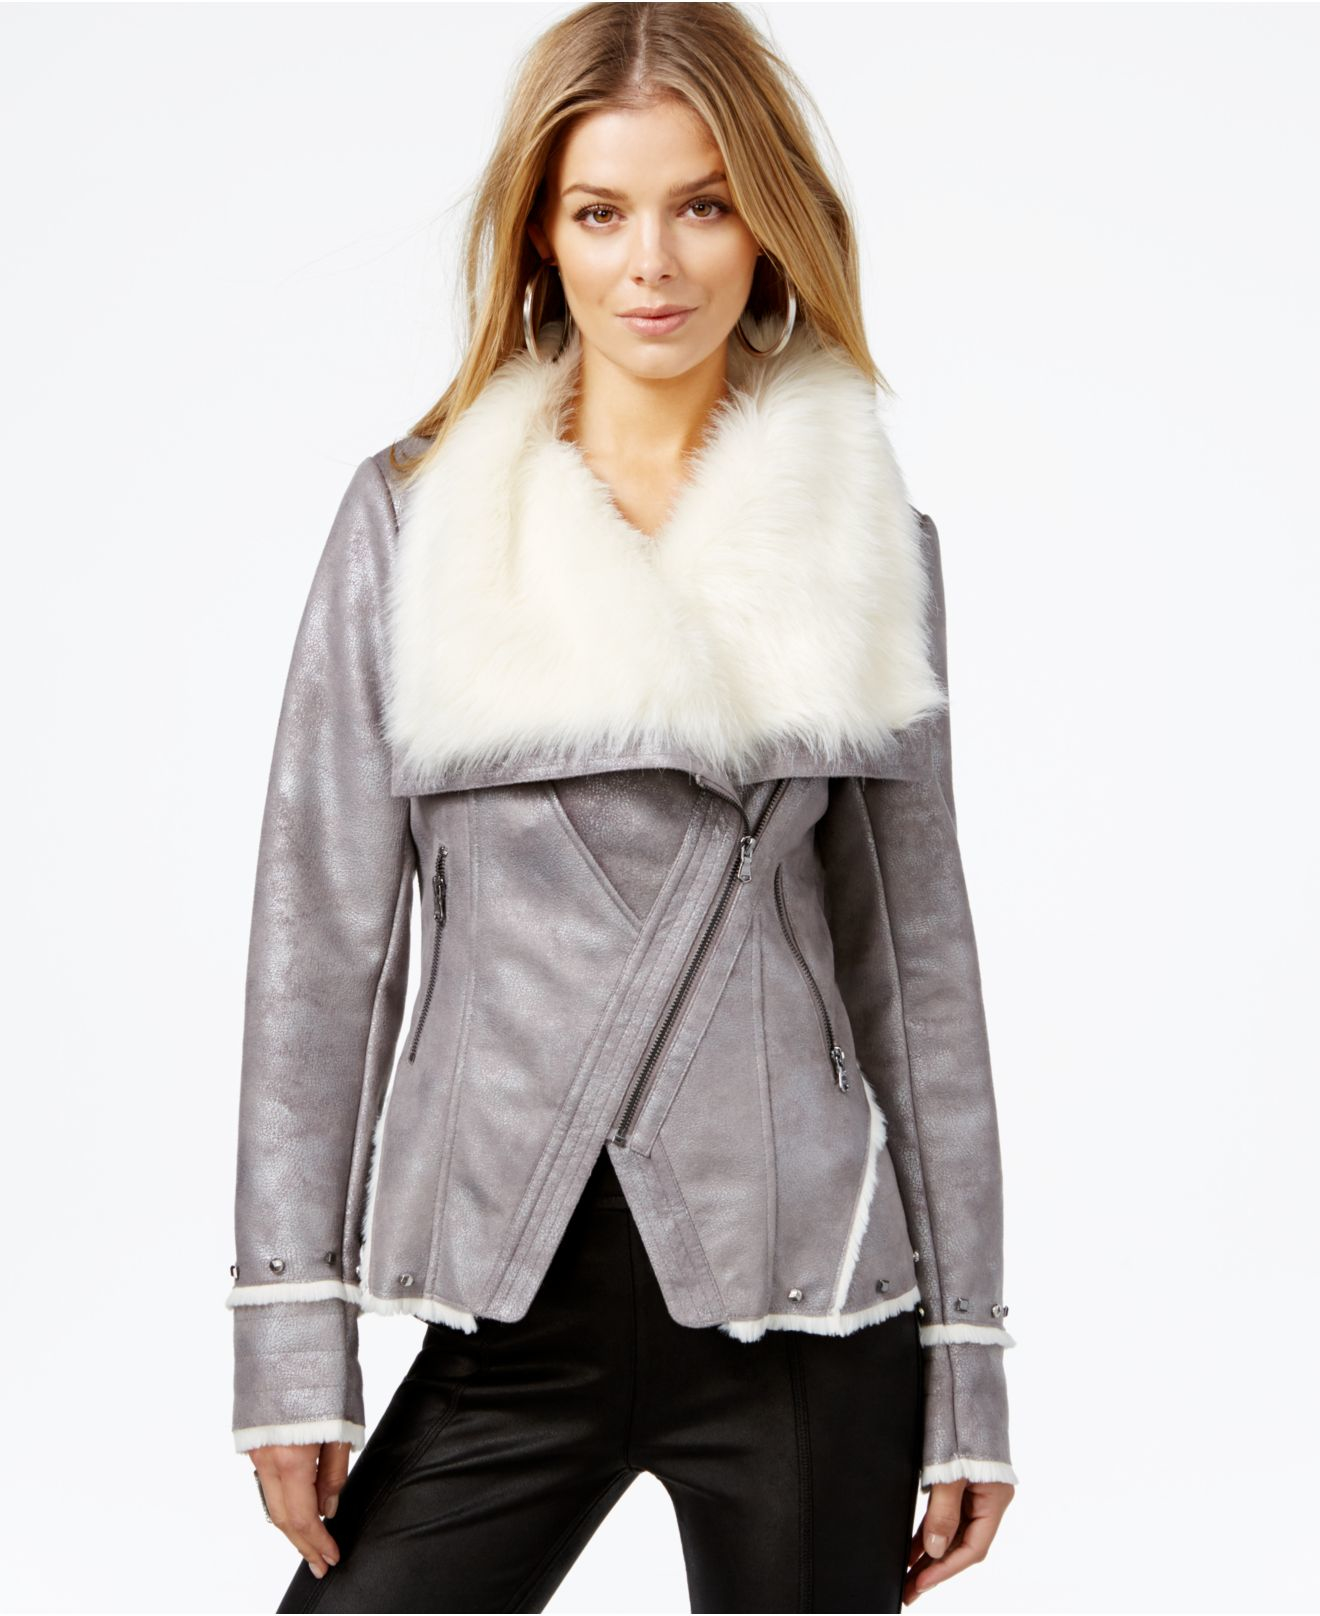 guess jacket with fur